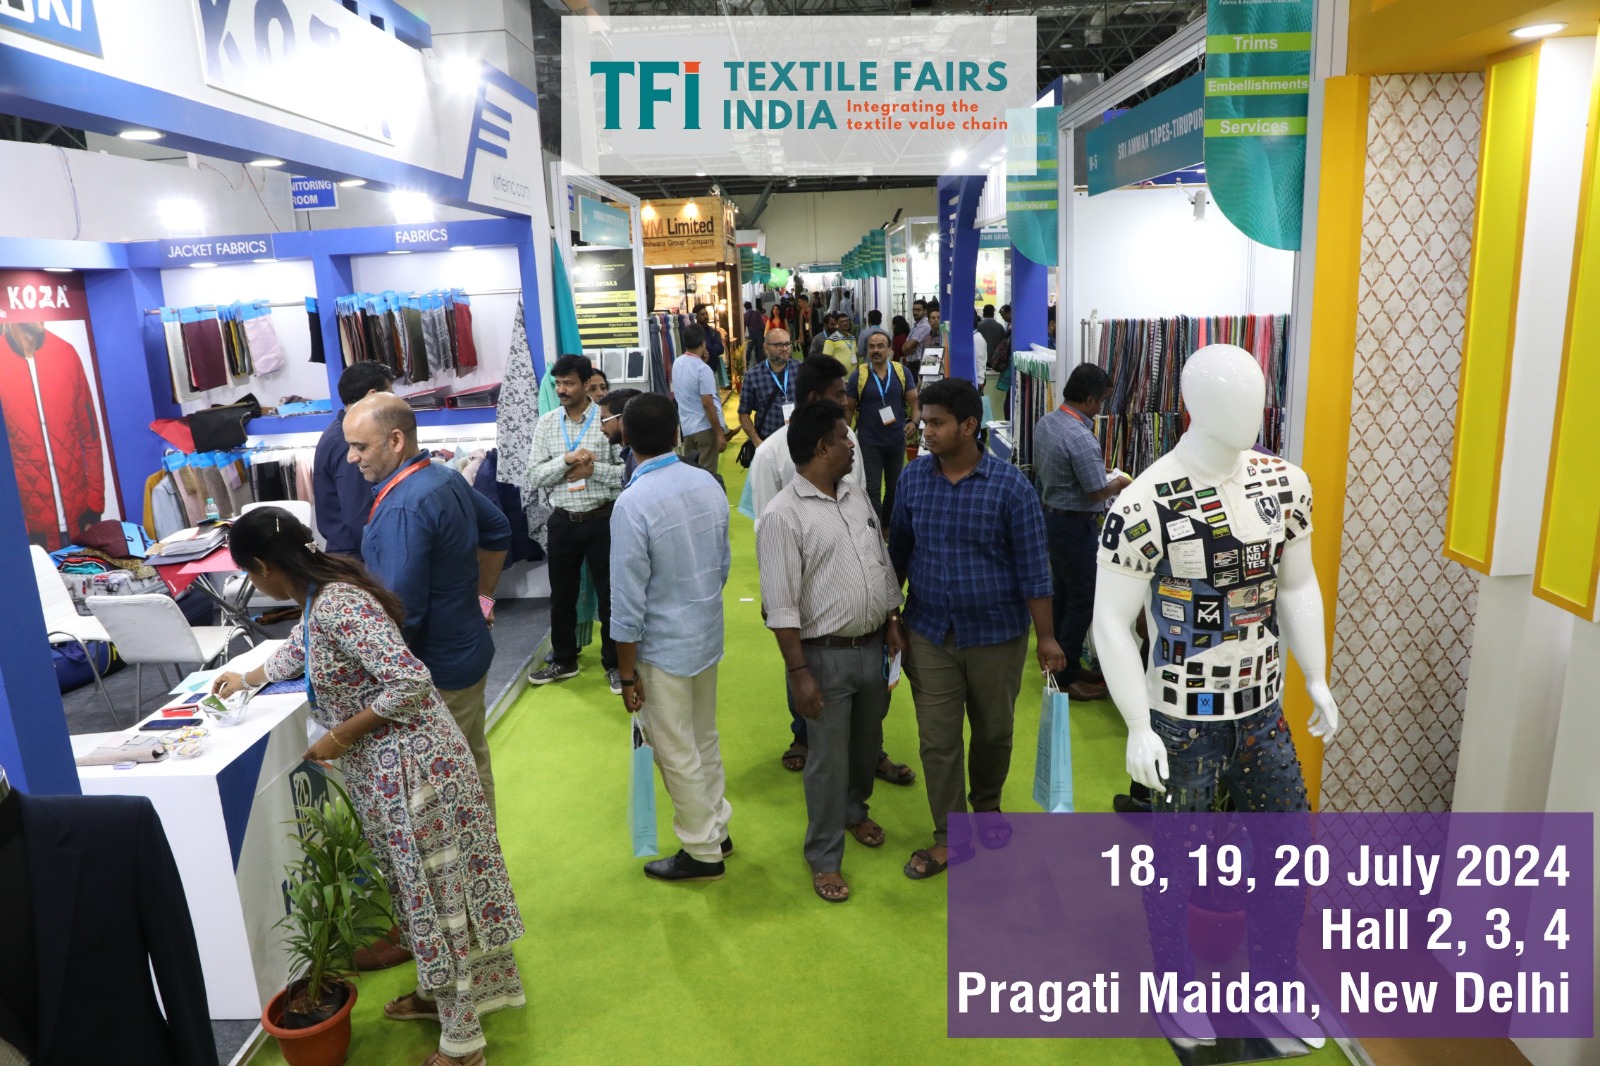 TFI - Textile Fairs India will bring the latest innovations to the forefront